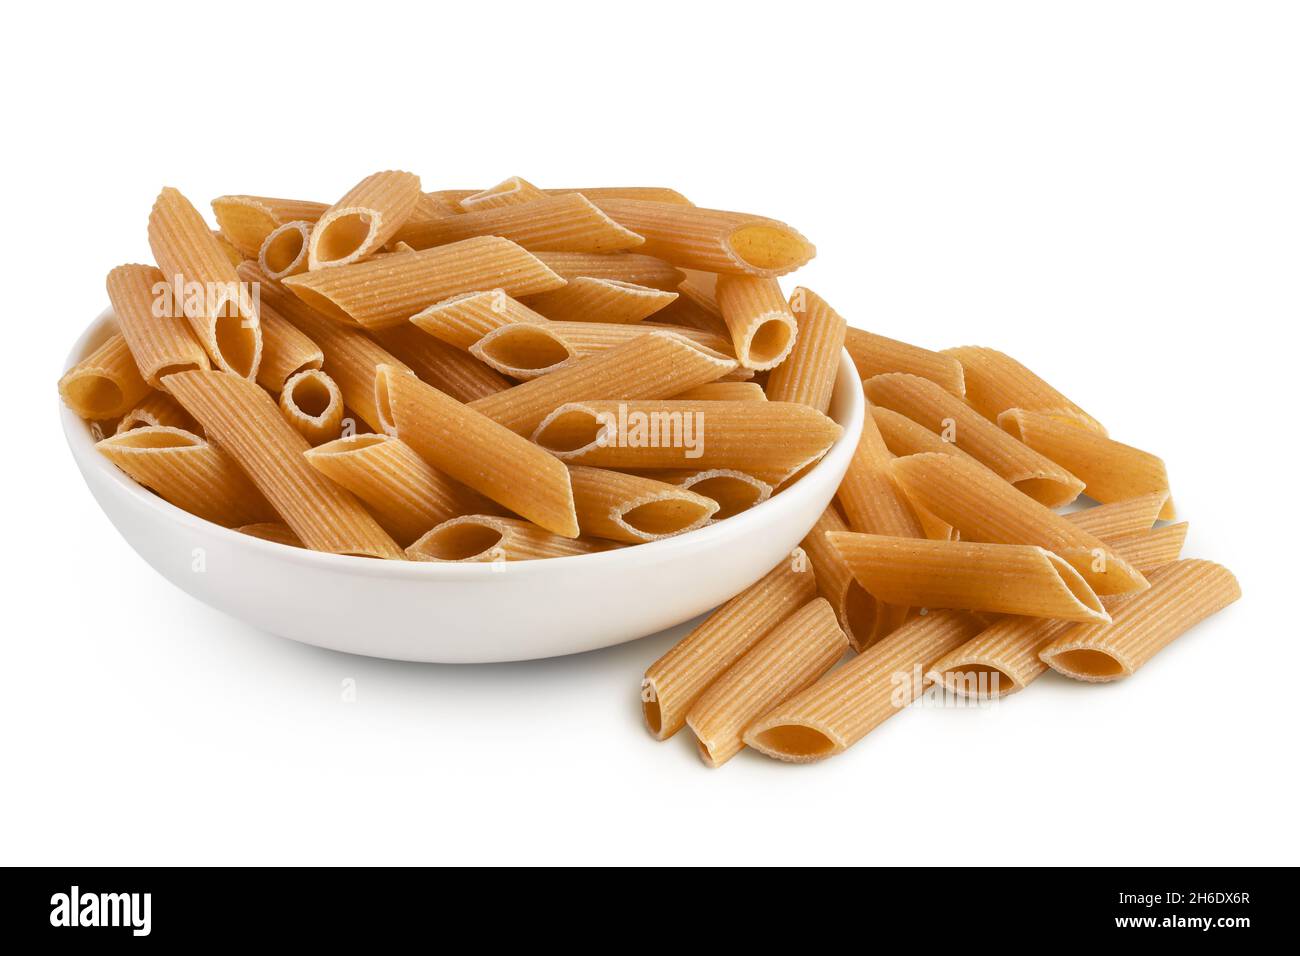 Wolegrain penne pasta from durum wheat isolated on white background with clipping path and full depth of field Stock Photo